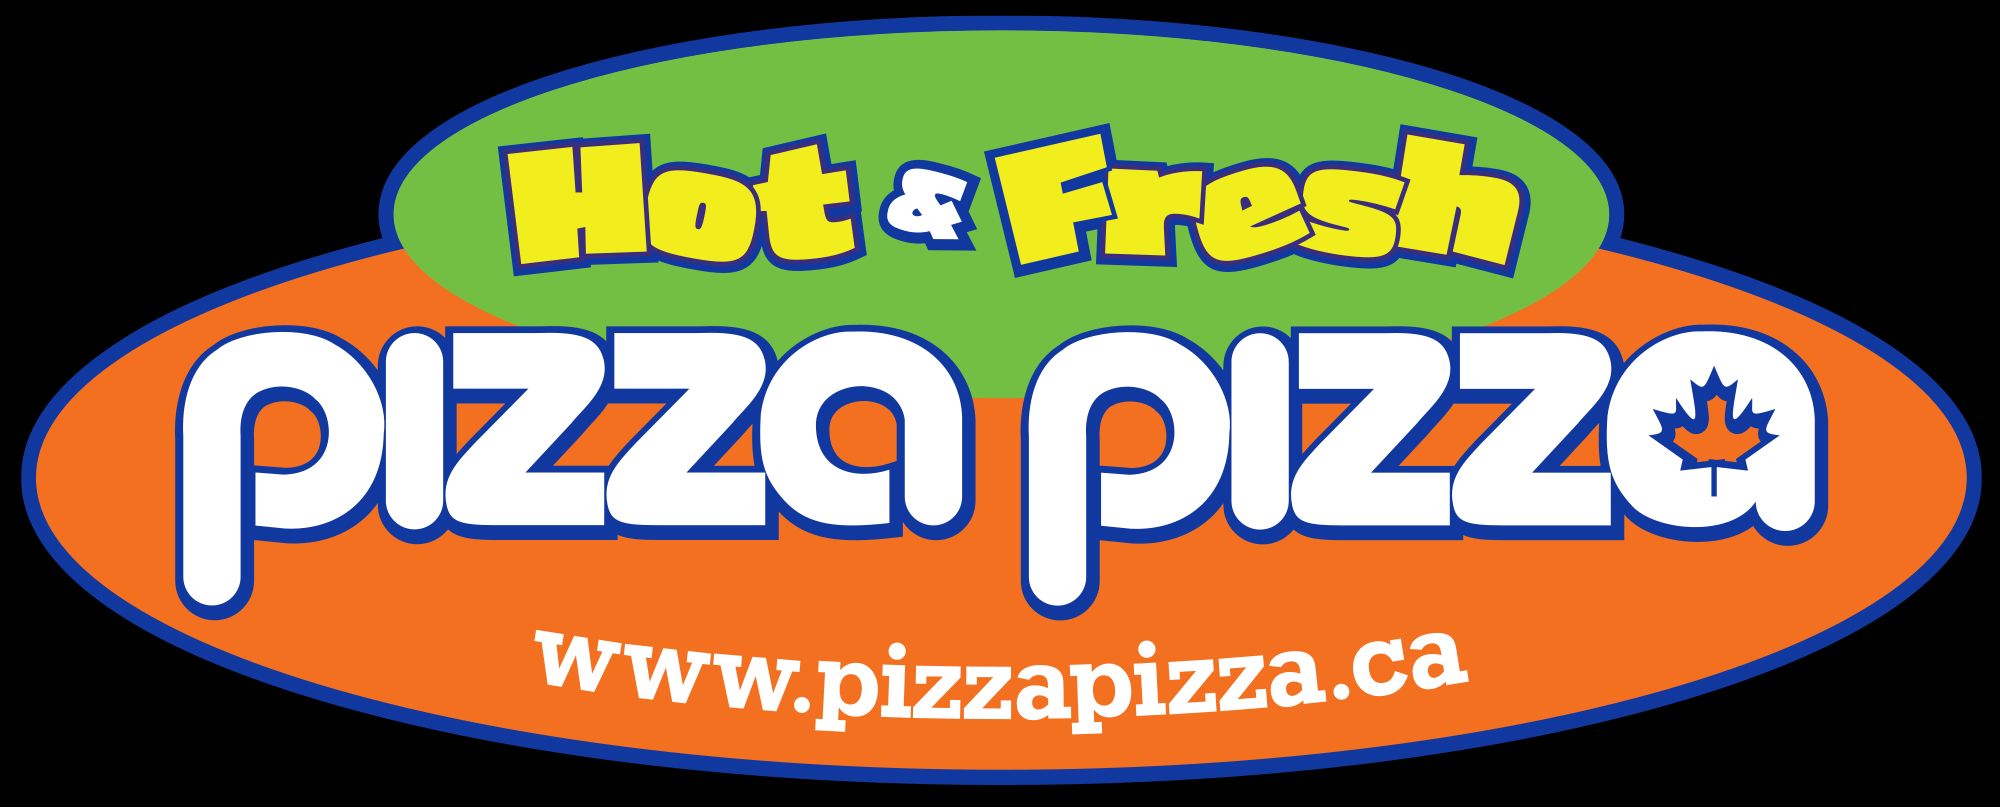 Pizza Pizza now exclusive pizza supplier at Woodbine and Mohawk